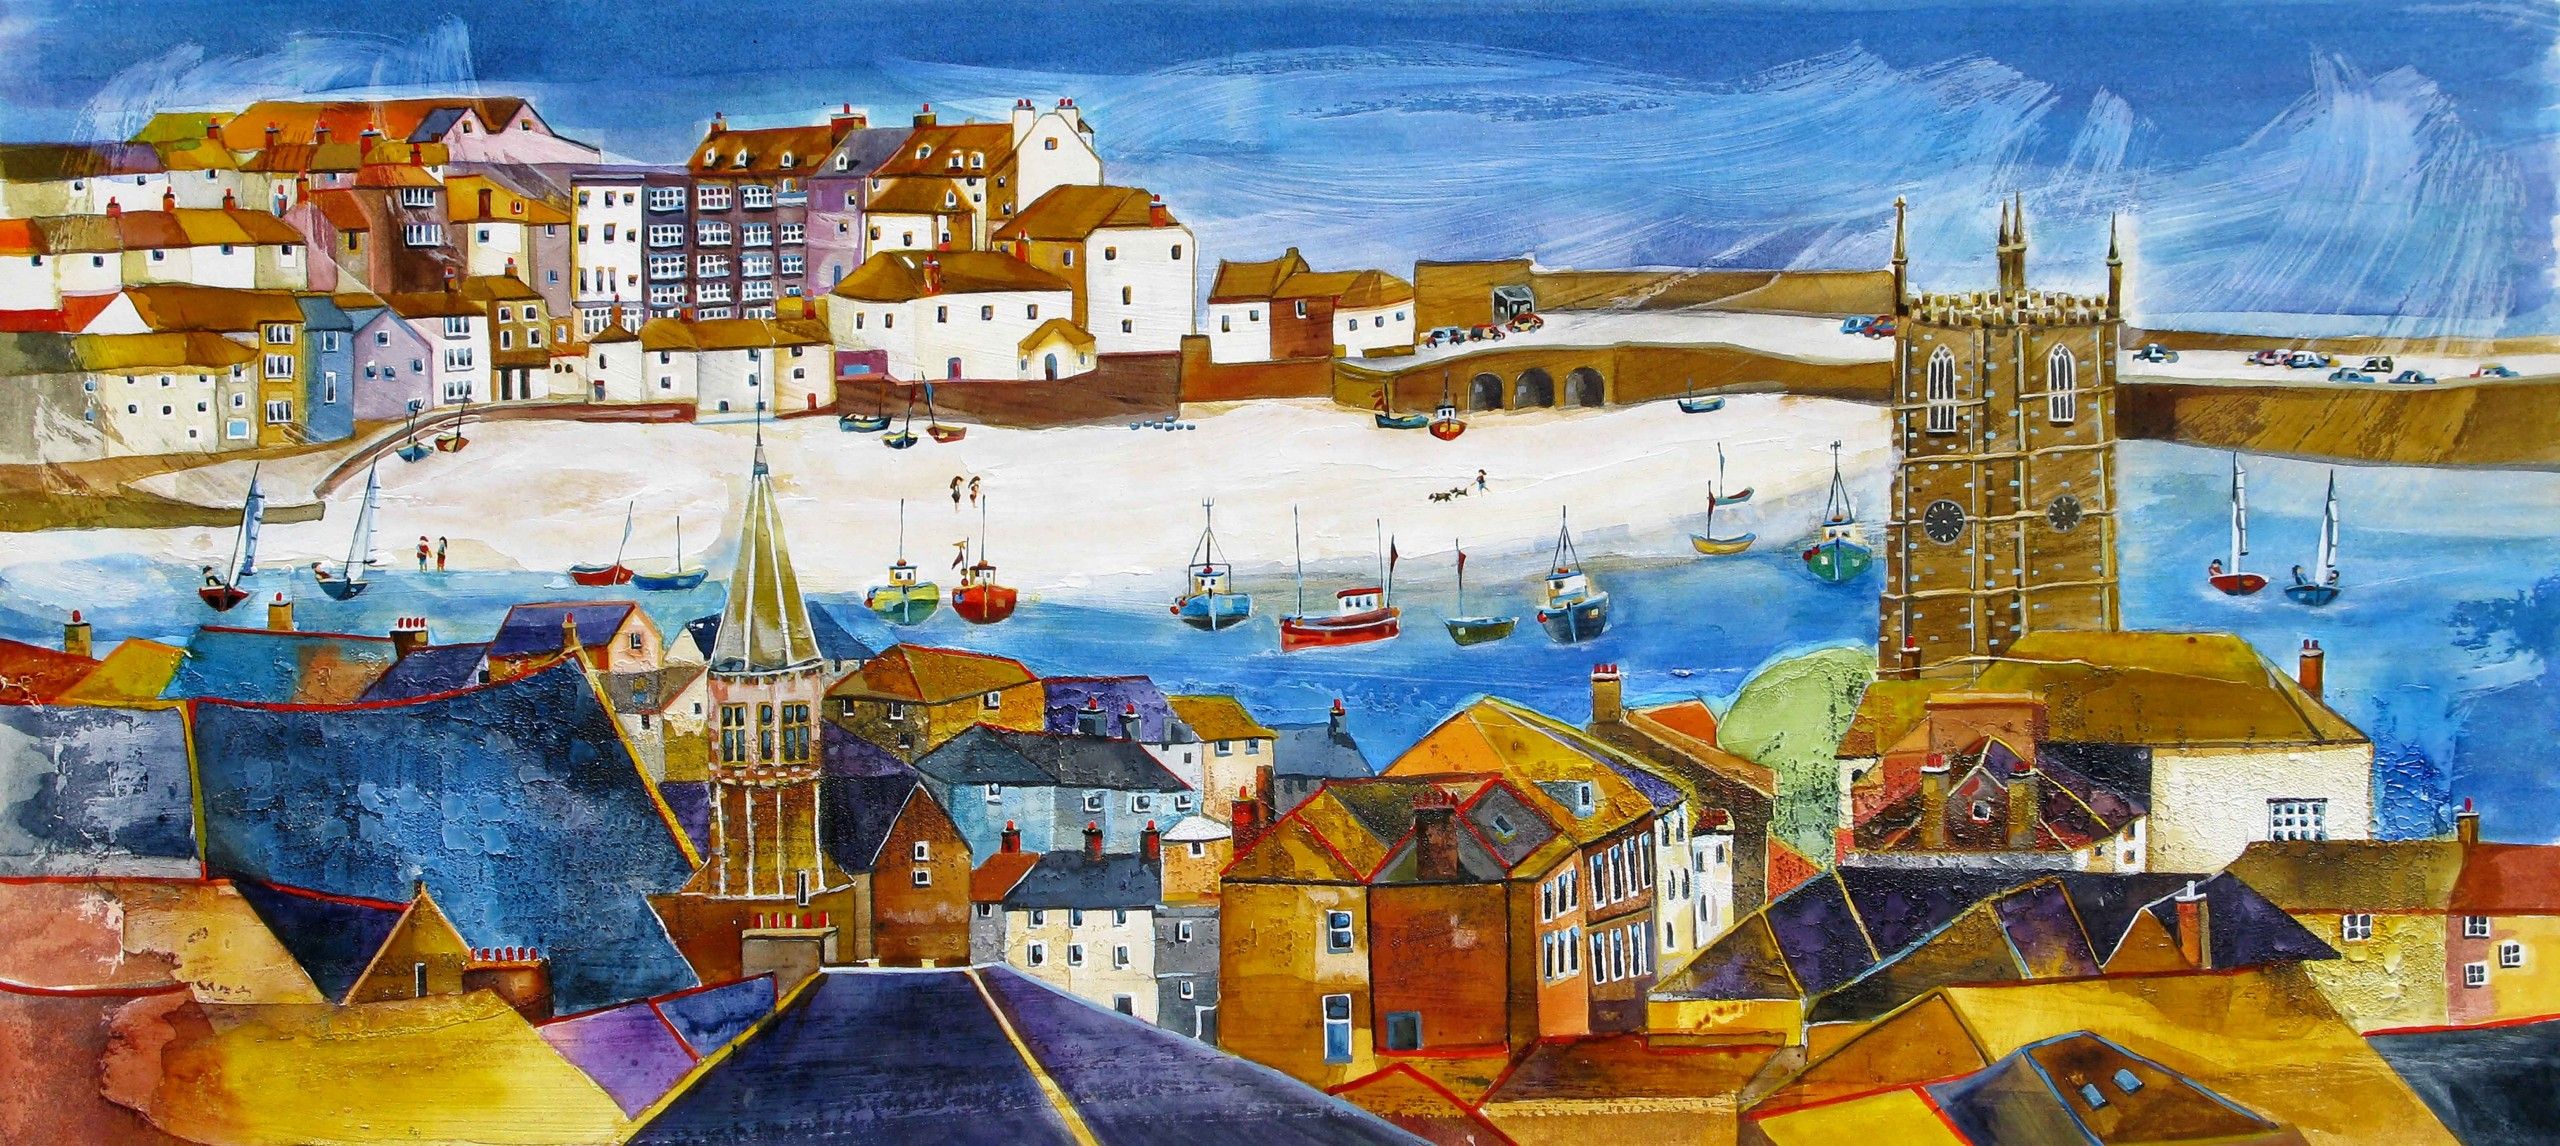 Magical St Ives by Anya Simmons